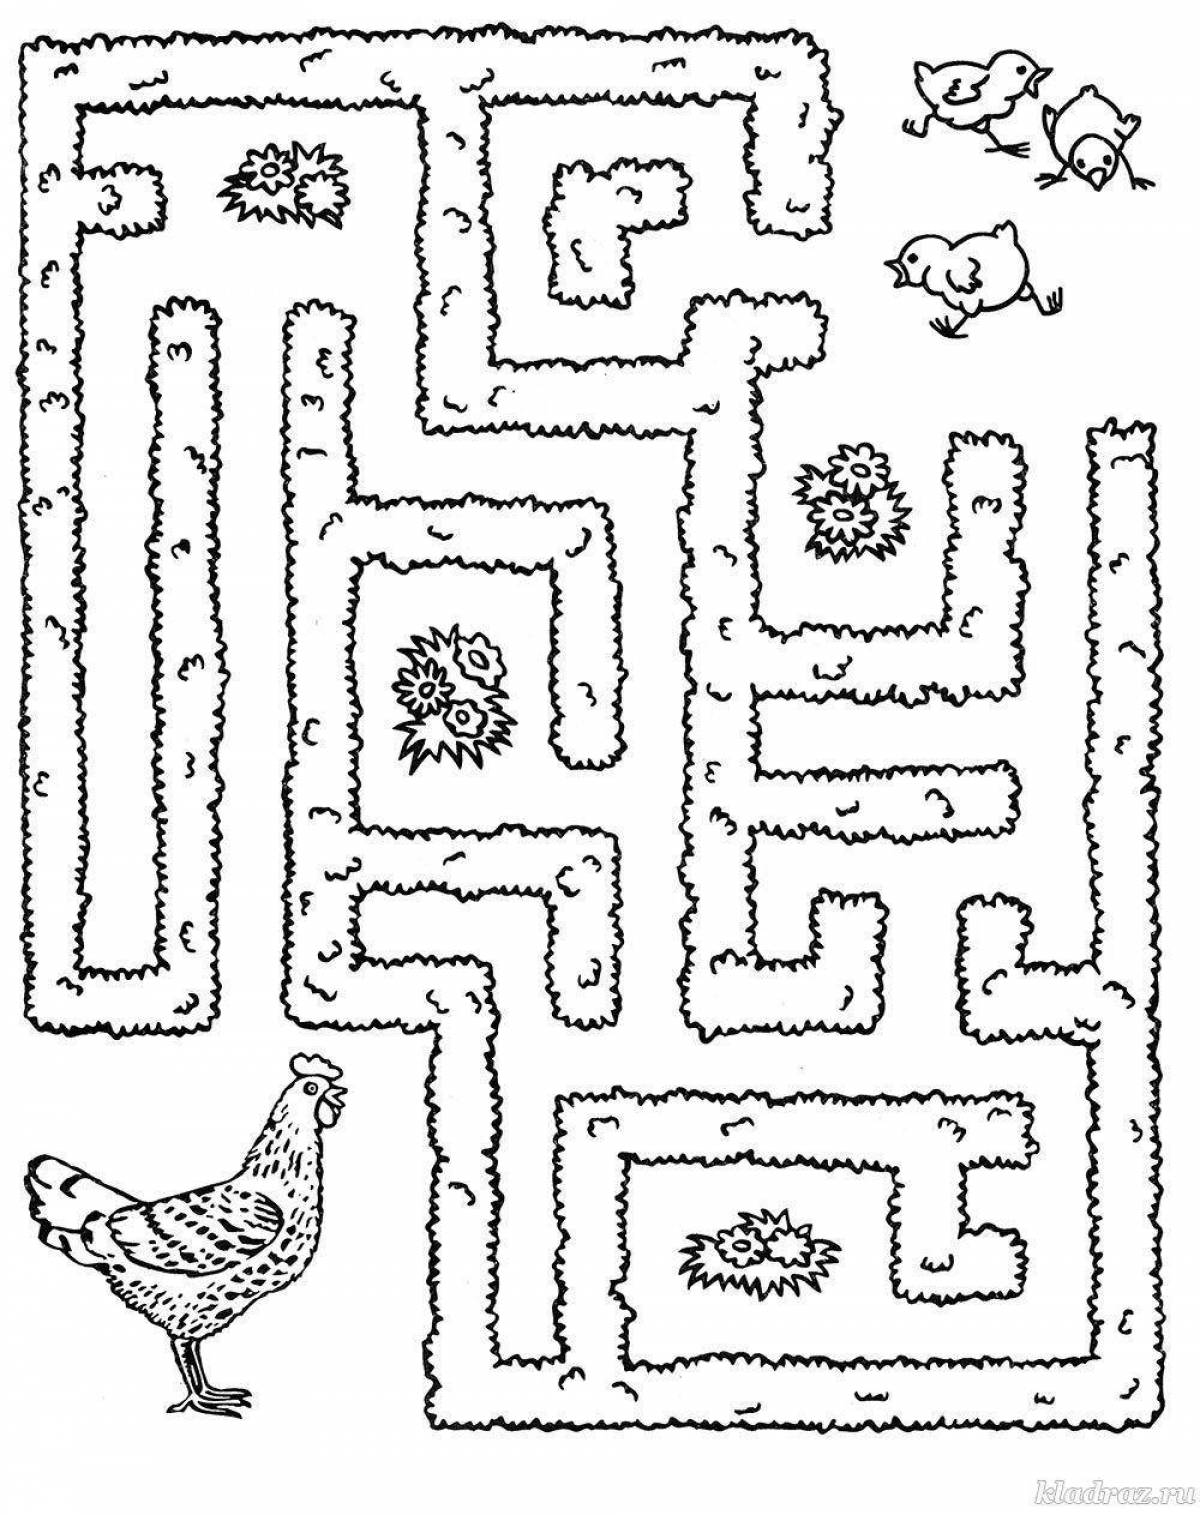 Exciting coloring maze for 3-4 year olds